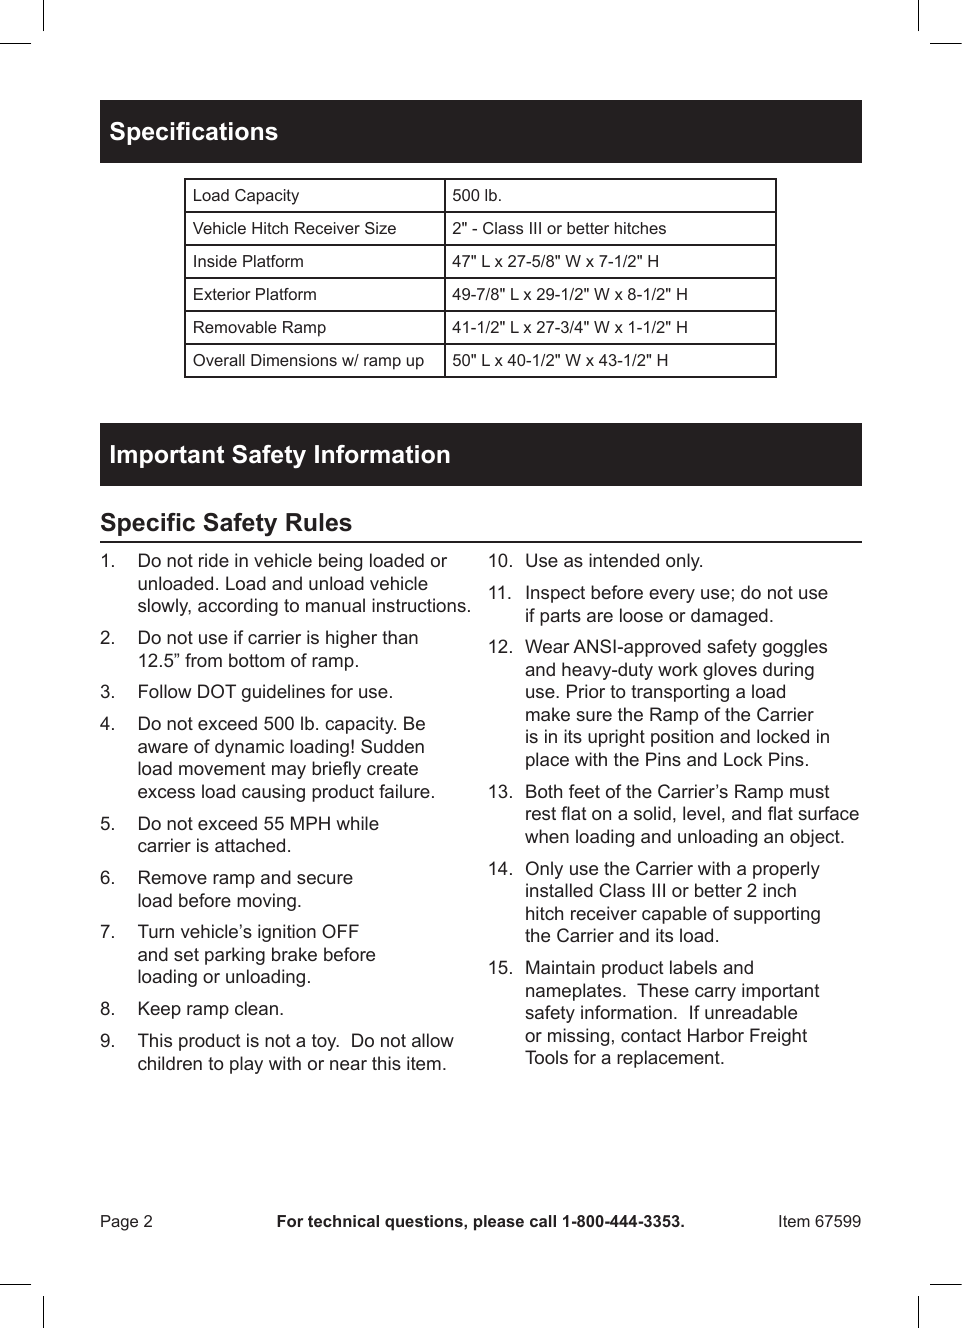 Page 2 of 12 - Harbor-Freight Harbor-Freight-500-Lb-Capacity-Aluminum-Mobility-Wheelchair-And-Scooter-Carrier-Product-Manual-  Harbor-freight-500-lb-capacity-aluminum-mobility-wheelchair-and-scooter-carrier-product-manual